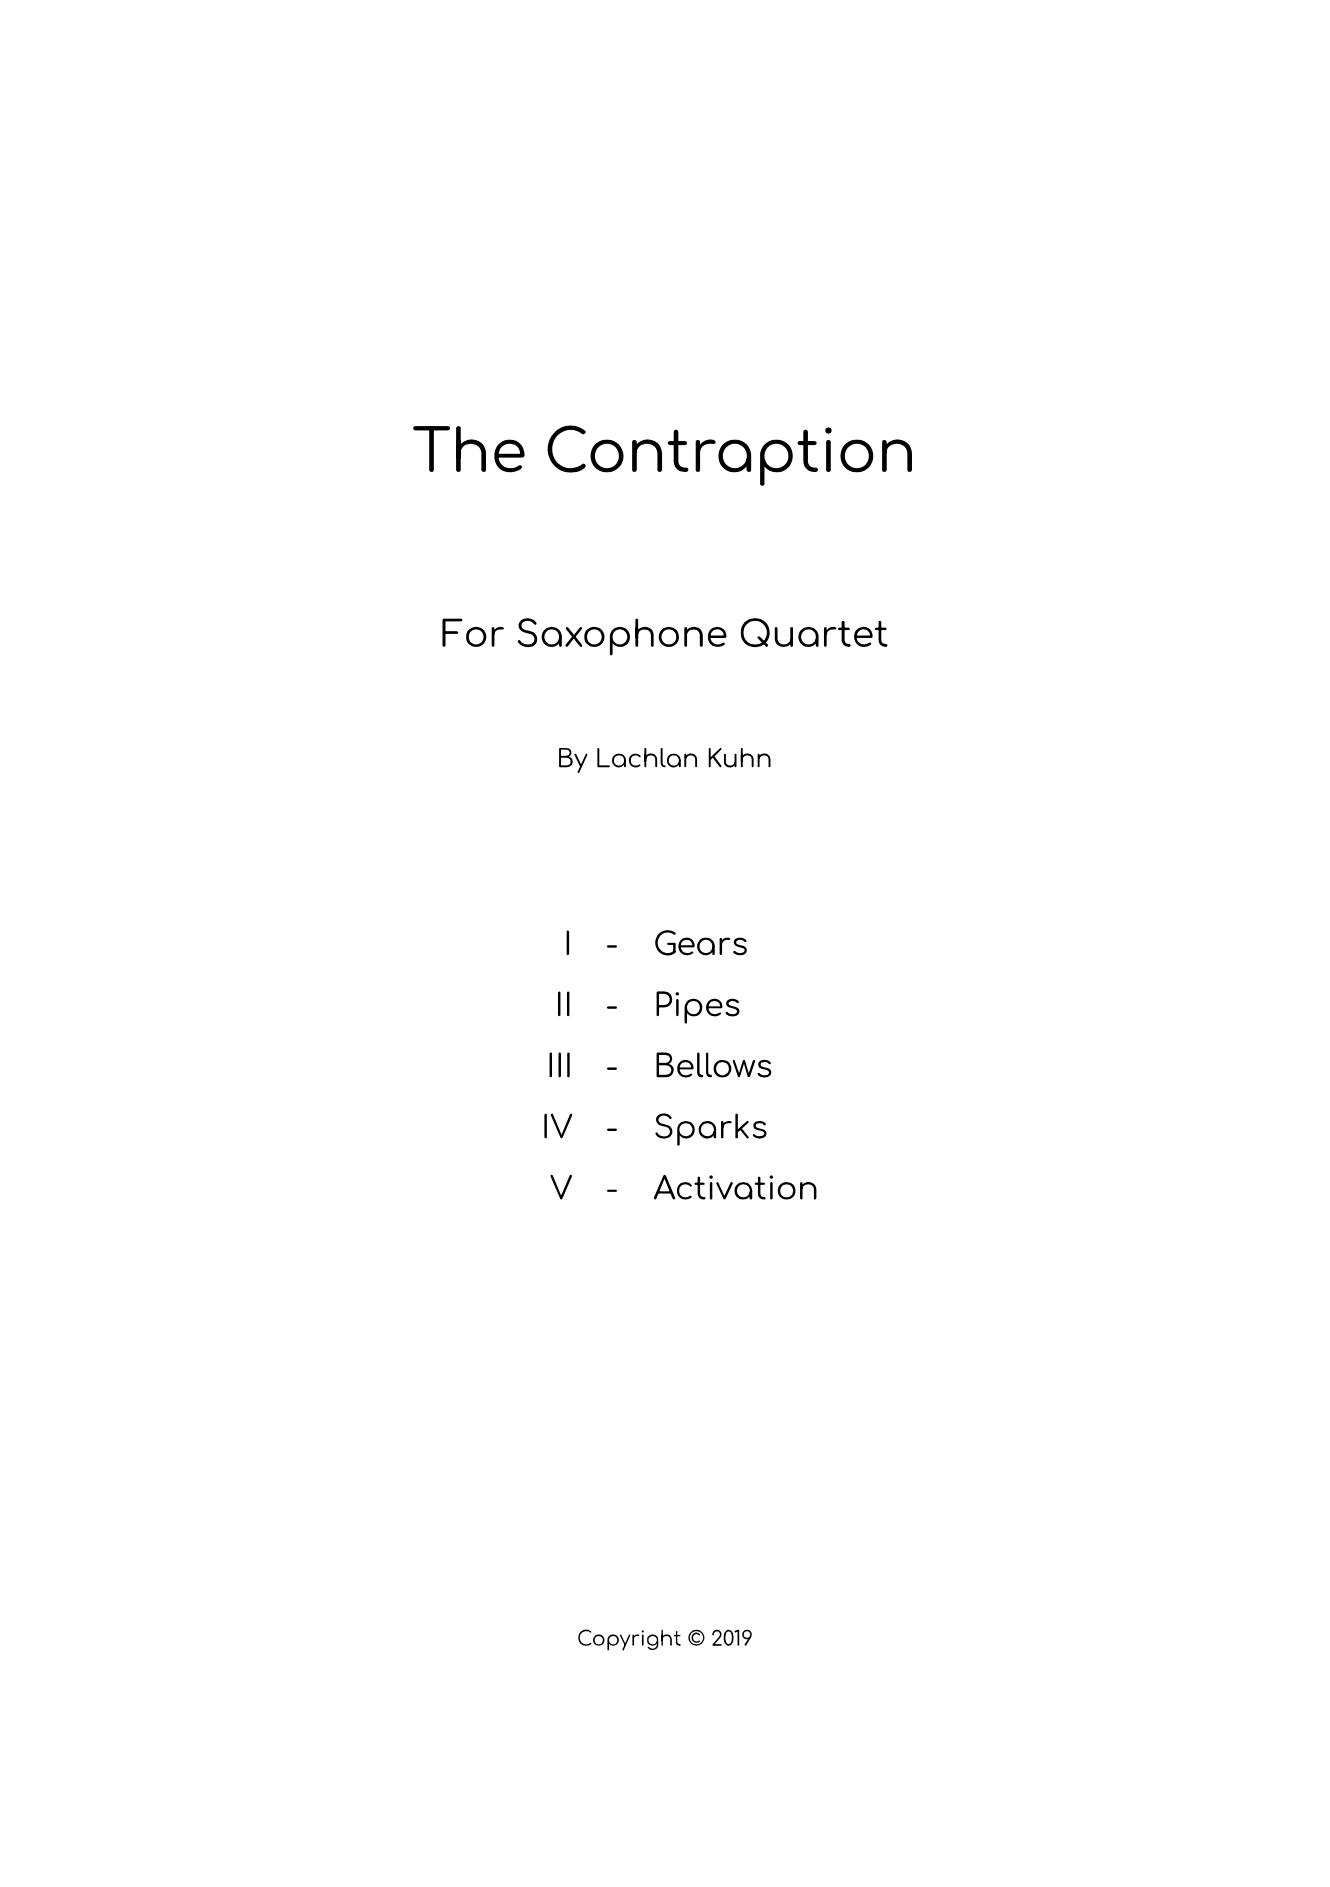 The Contraption  by Lachlan Kuhn